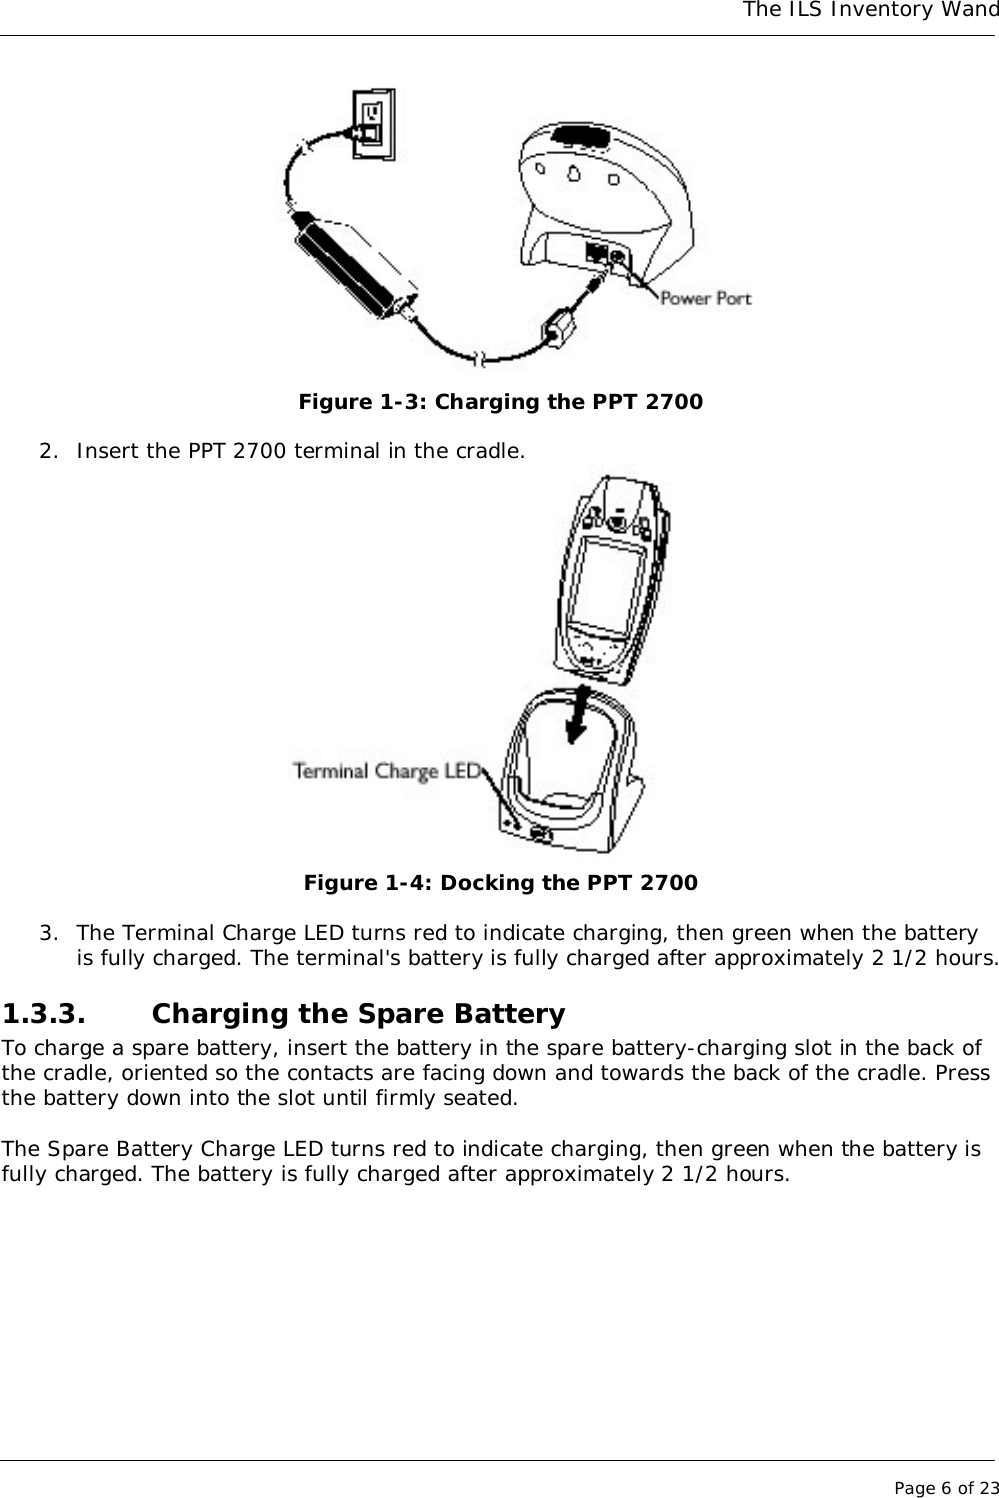 The ILS Inventory WandPage 6 of 23Figure 1-3: Charging the PPT 27002. Insert the PPT 2700 terminal in the cradle.Figure 1-4: Docking the PPT 27003. The Terminal Charge LED turns red to indicate charging, then green when the batteryis fully charged. The terminal&apos;s battery is fully charged after approximately 2 1/2 hours.1.3.3. Charging the Spare BatteryTo charge a spare battery, insert the battery in the spare battery-charging slot in the back ofthe cradle, oriented so the contacts are facing down and towards the back of the cradle. Pressthe battery down into the slot until firmly seated.The Spare Battery Charge LED turns red to indicate charging, then green when the battery isfully charged. The battery is fully charged after approximately 2 1/2 hours.